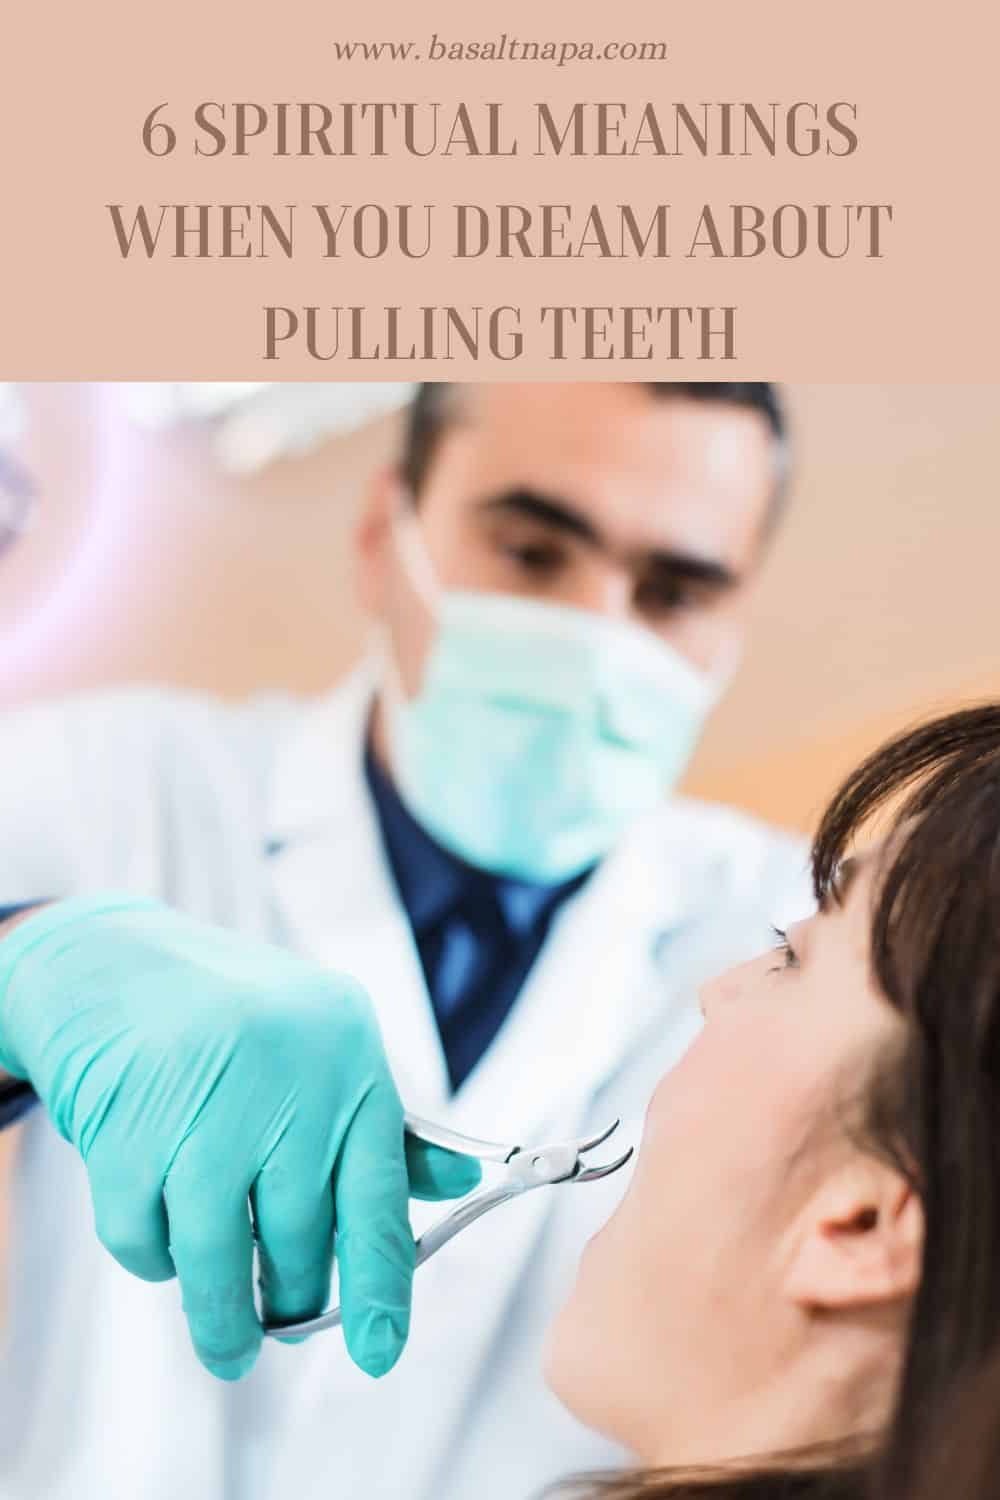 6 Spiritual Meanings When You Dream About Pulling Teeth